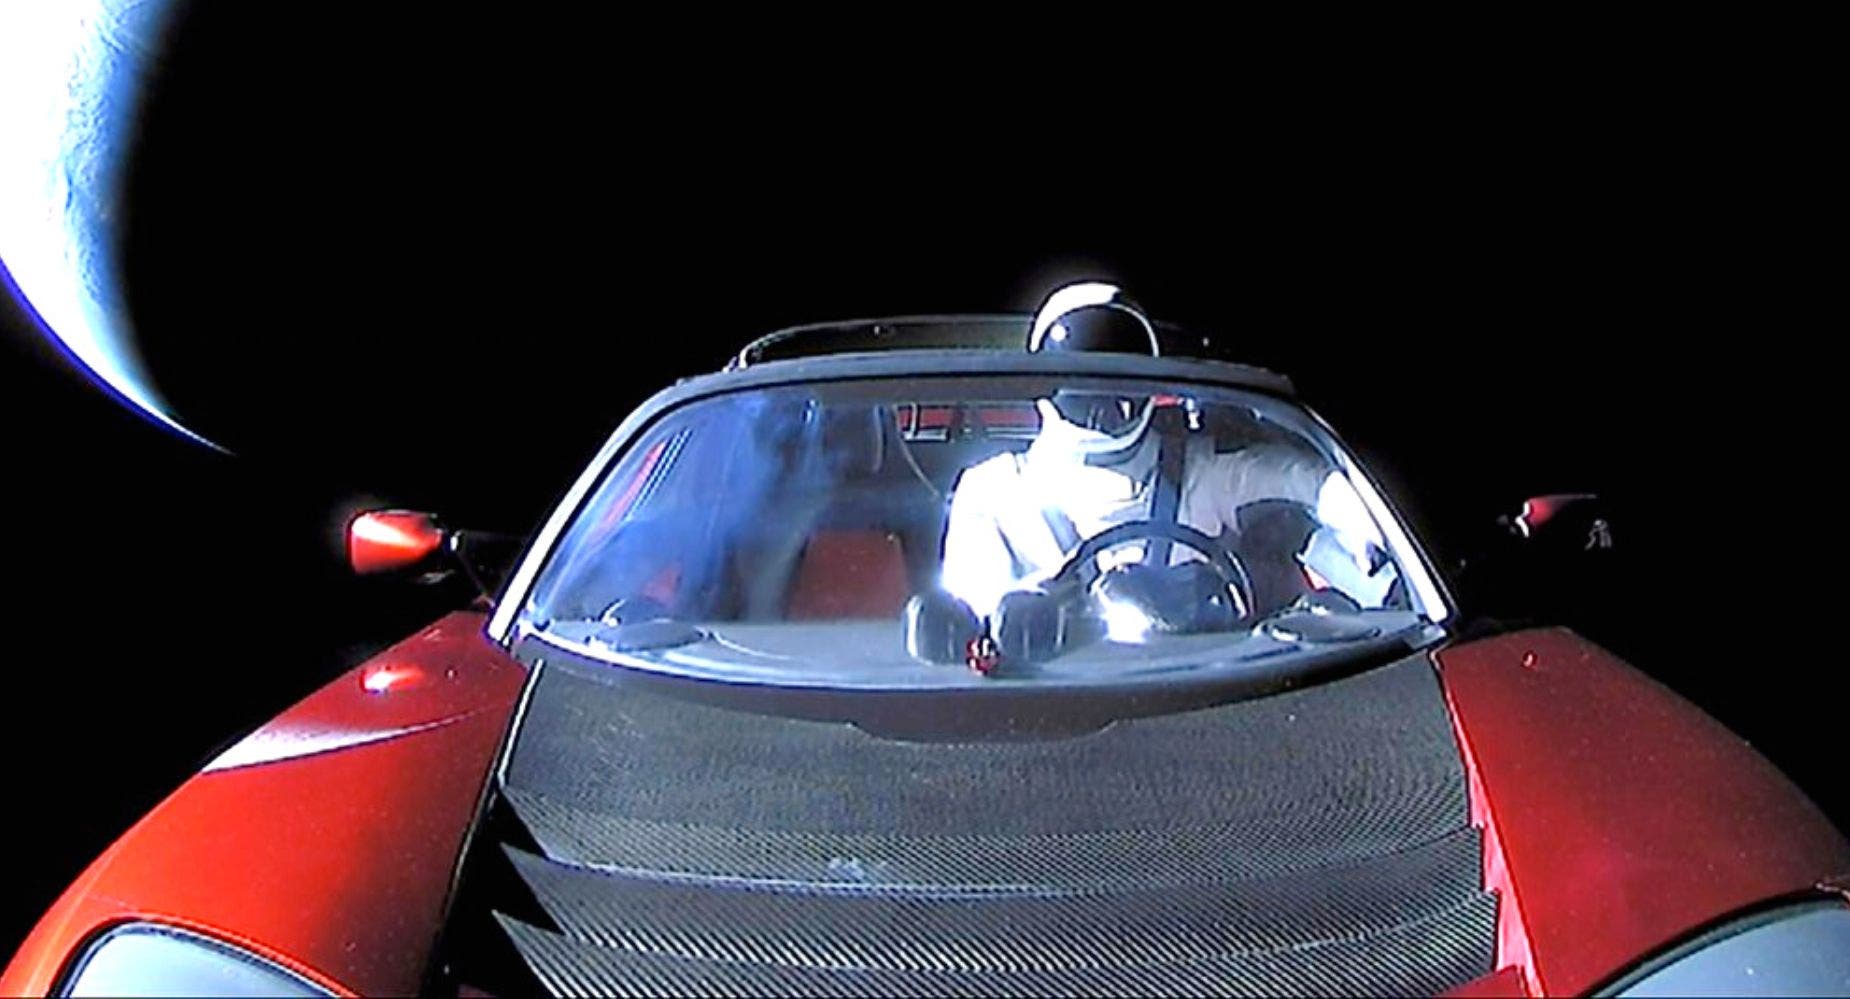 Elon Musk's Tesla Roadster Marks 5 Years In Space - Where Is It Now?